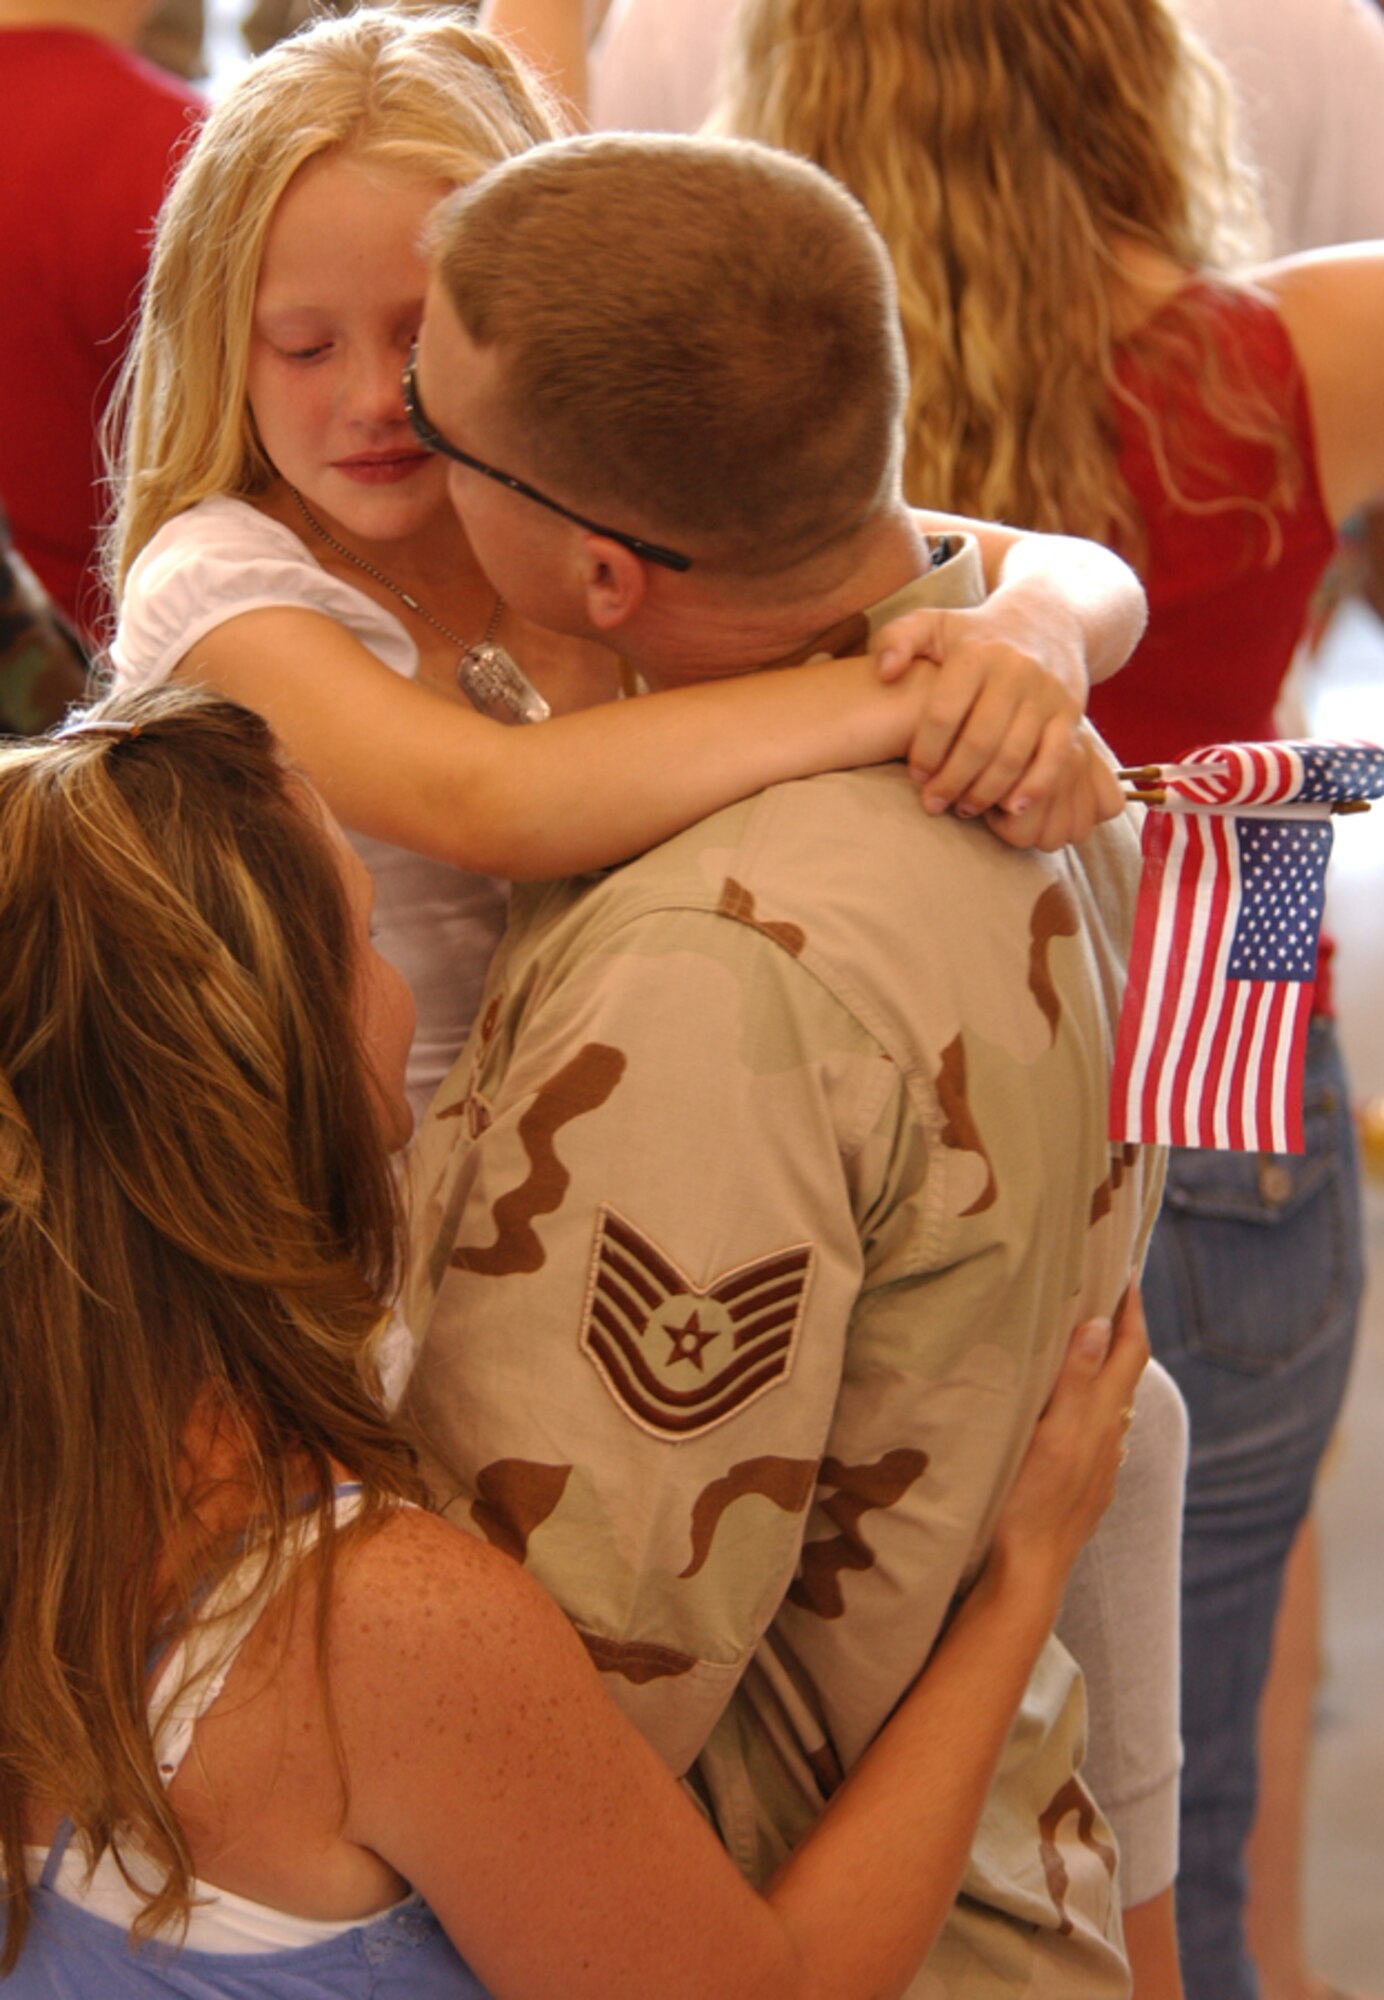 Tech. Sgt. Alan Finck, 1st Special Operations Equipment Maintenance Squadron, comforts his daughter after returning from his deployment July 4. He was one of the more than 200 Airmen who returned from deployments in support of Operations Iraqi and Enduring Freedom on Independence Day. (U.S. Air Force photo by Tech. Sgt. Angela Shepherd)